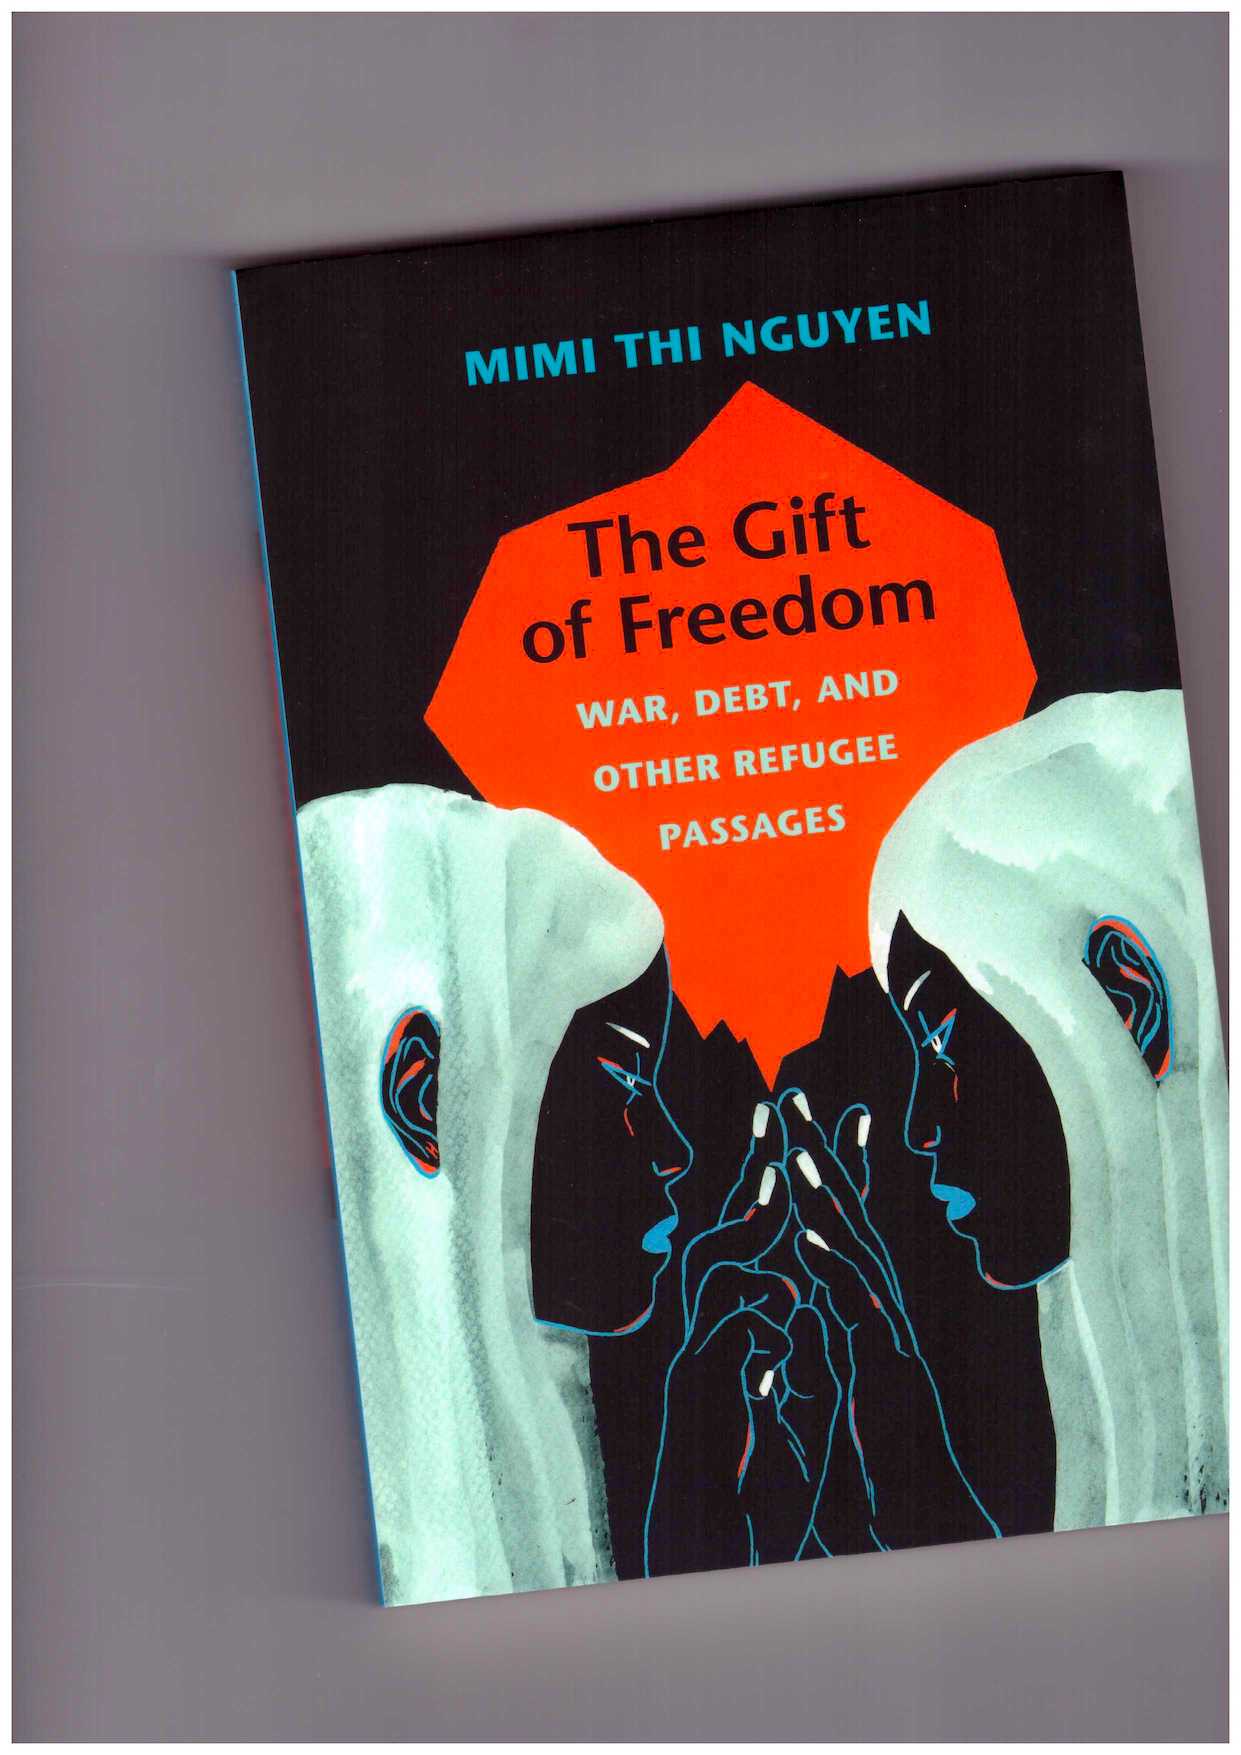 NGUYEN, Mimi Thi - The Gift of Freedom. War, Debt, and Other Refugee Passages